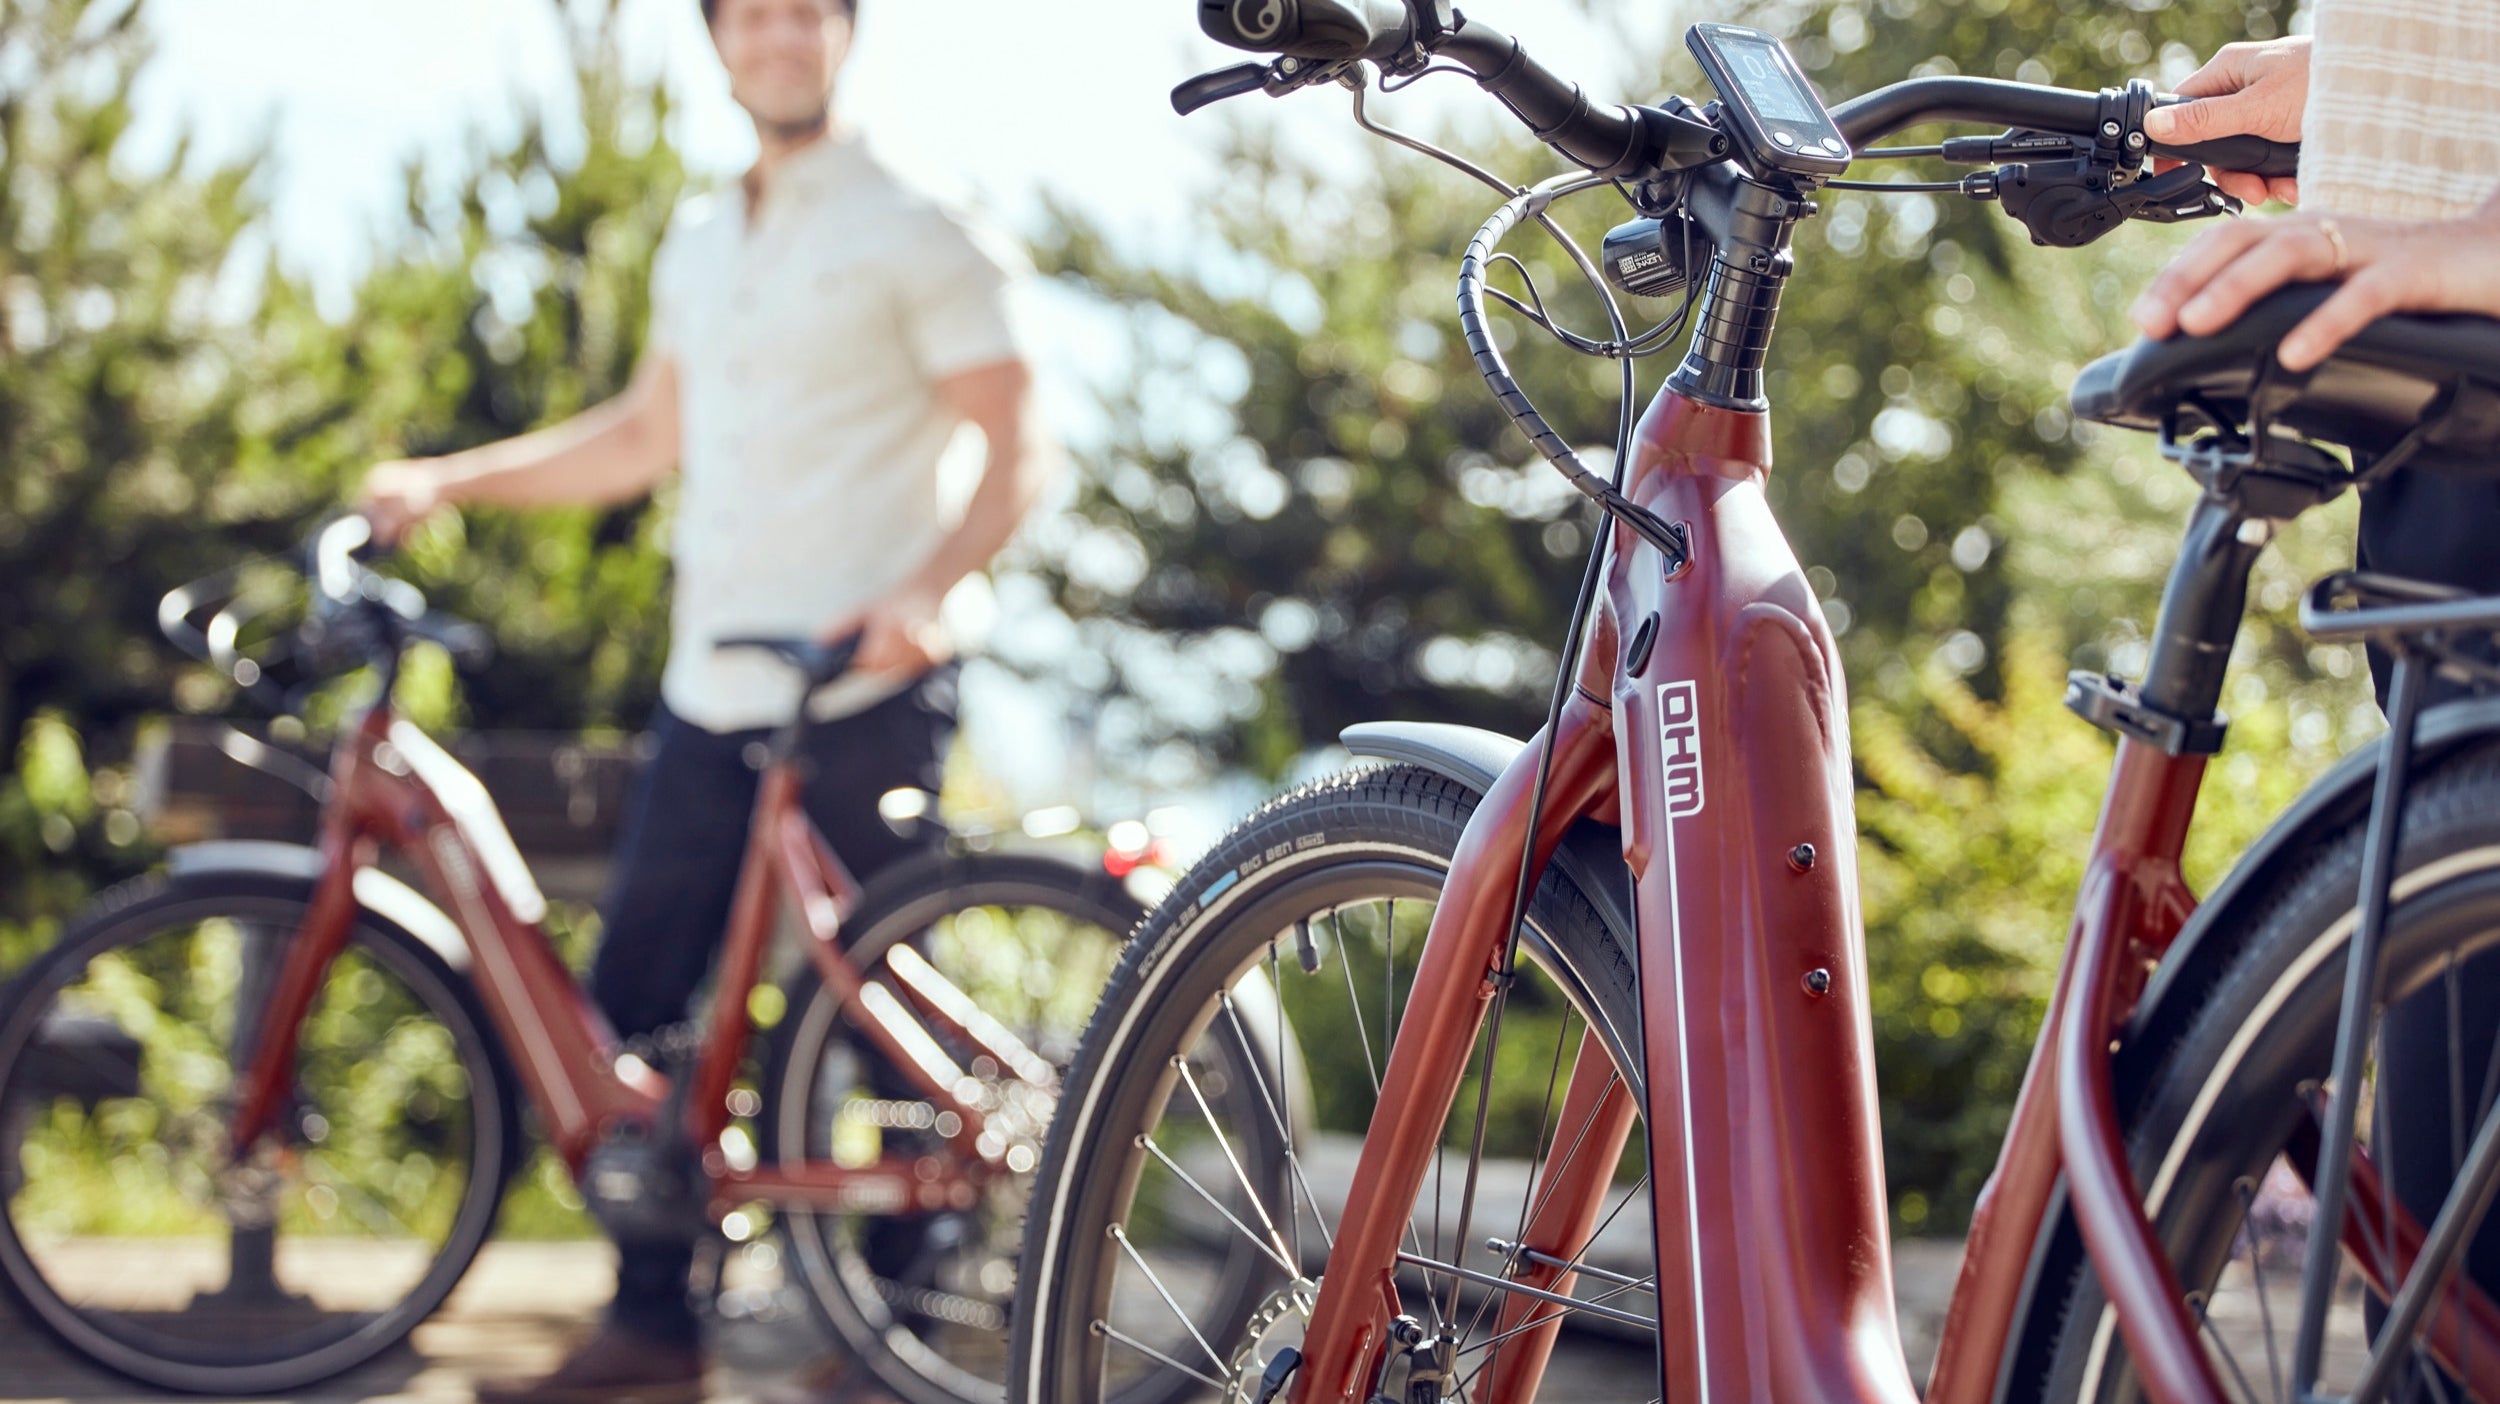 8 Health Benefits of Riding an OHM Electric Bike